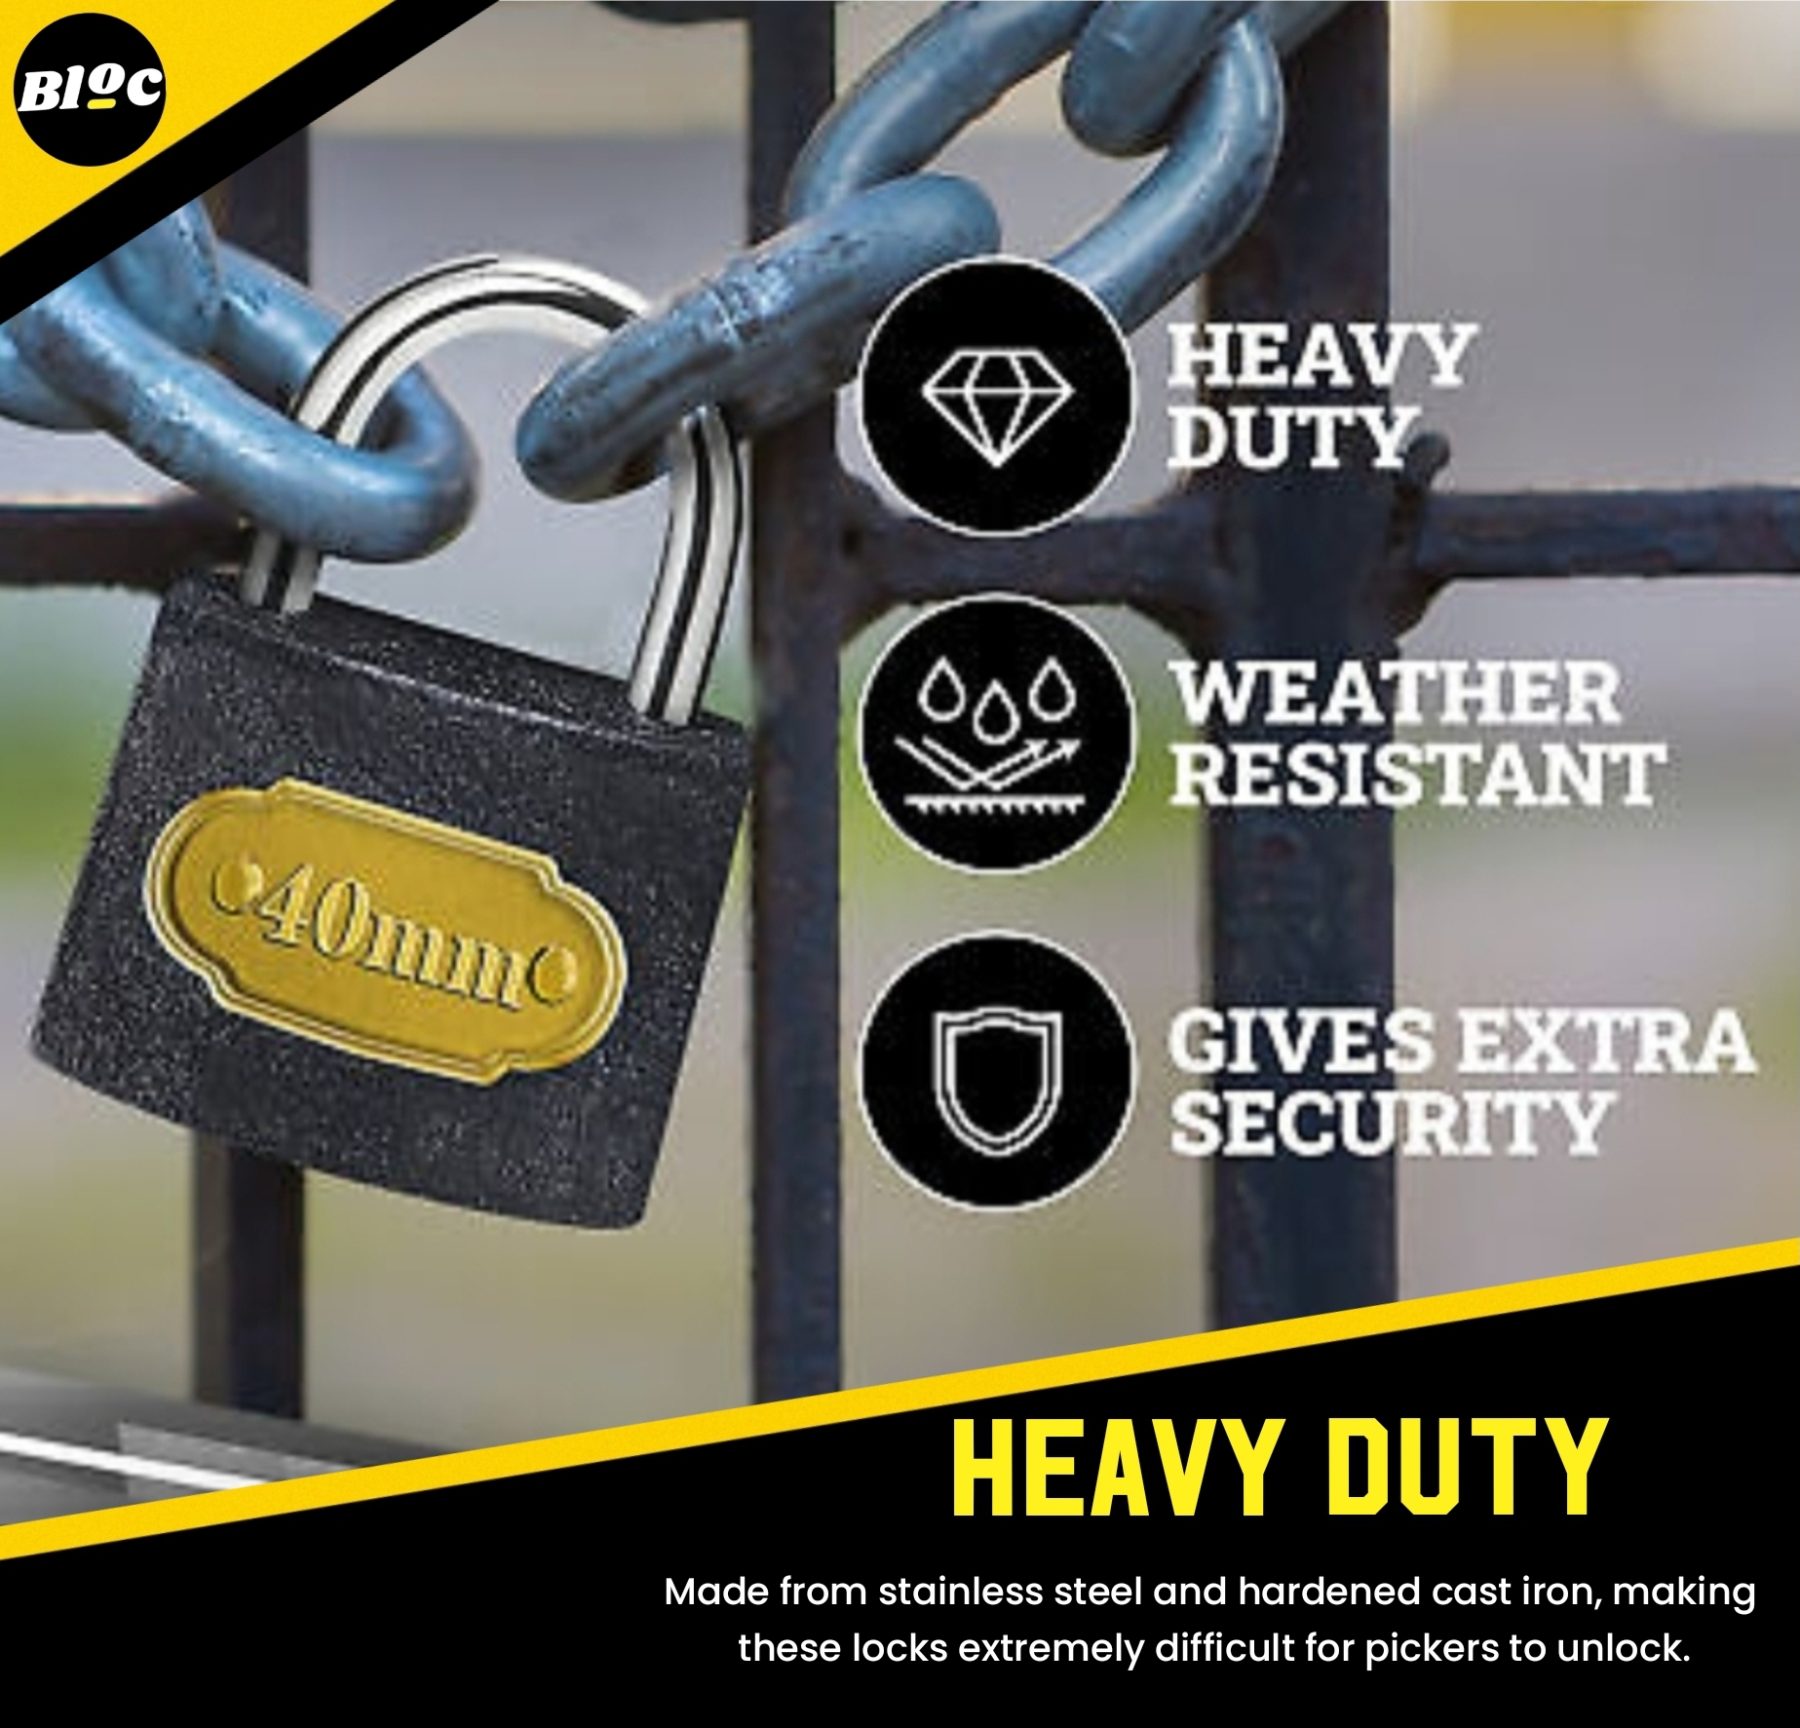 Heavy Duty 40mm Cast Iron & 5mm Hardened Stainless Steel Padlocks 2pk; Extremely Tough Weather Resistant Security Shackle Locks With 2 Keys Each.